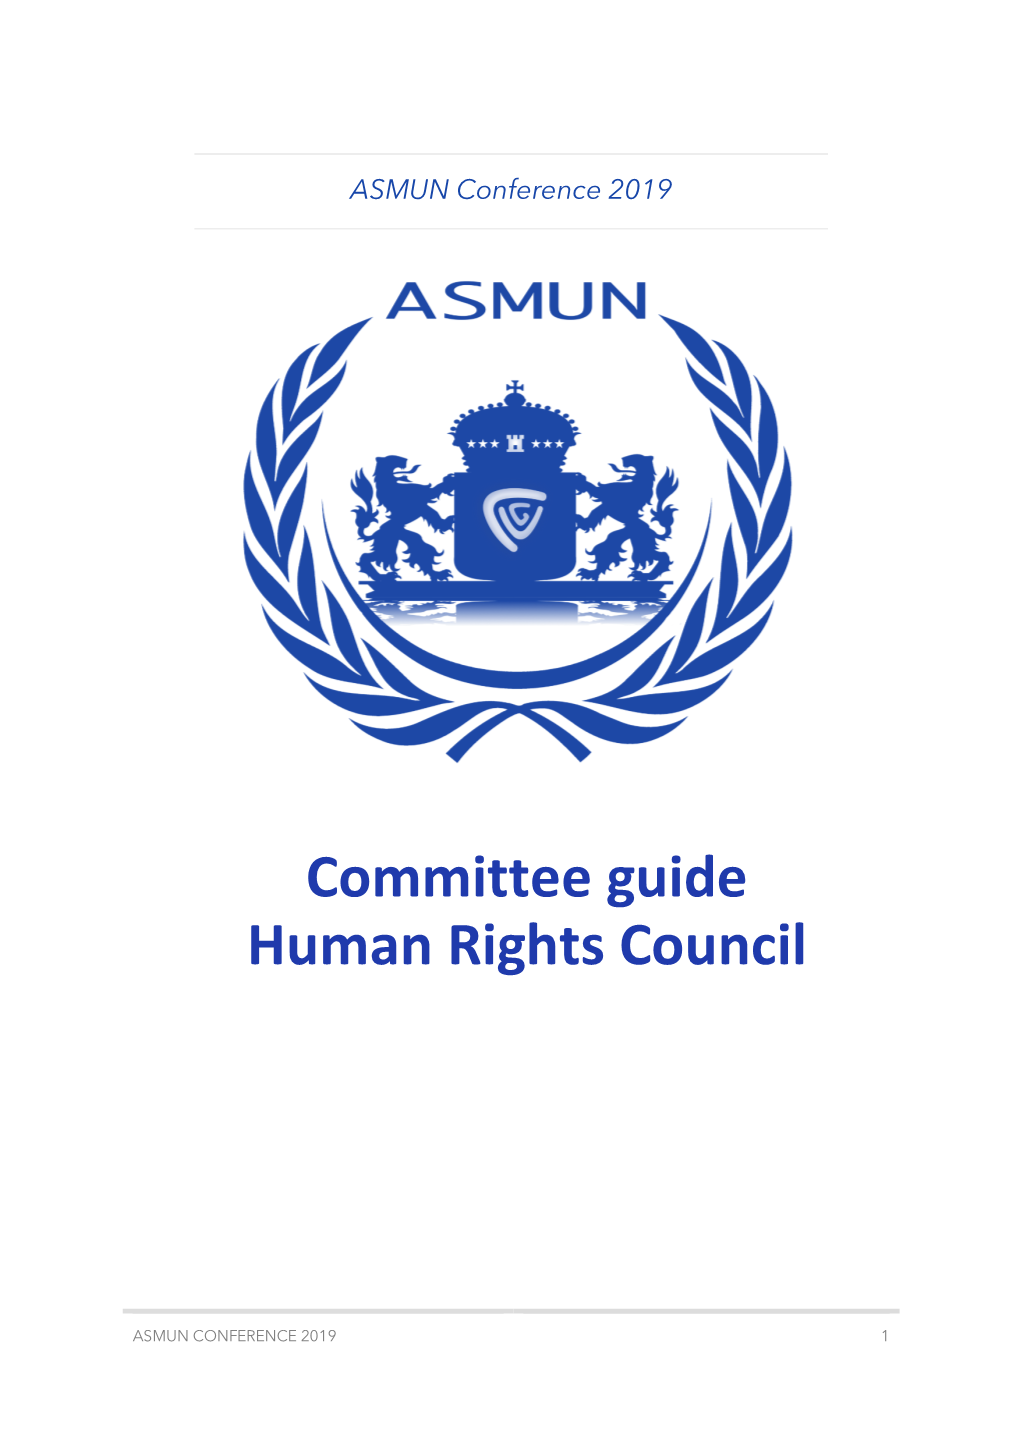 Committee Guide Human Rights Council